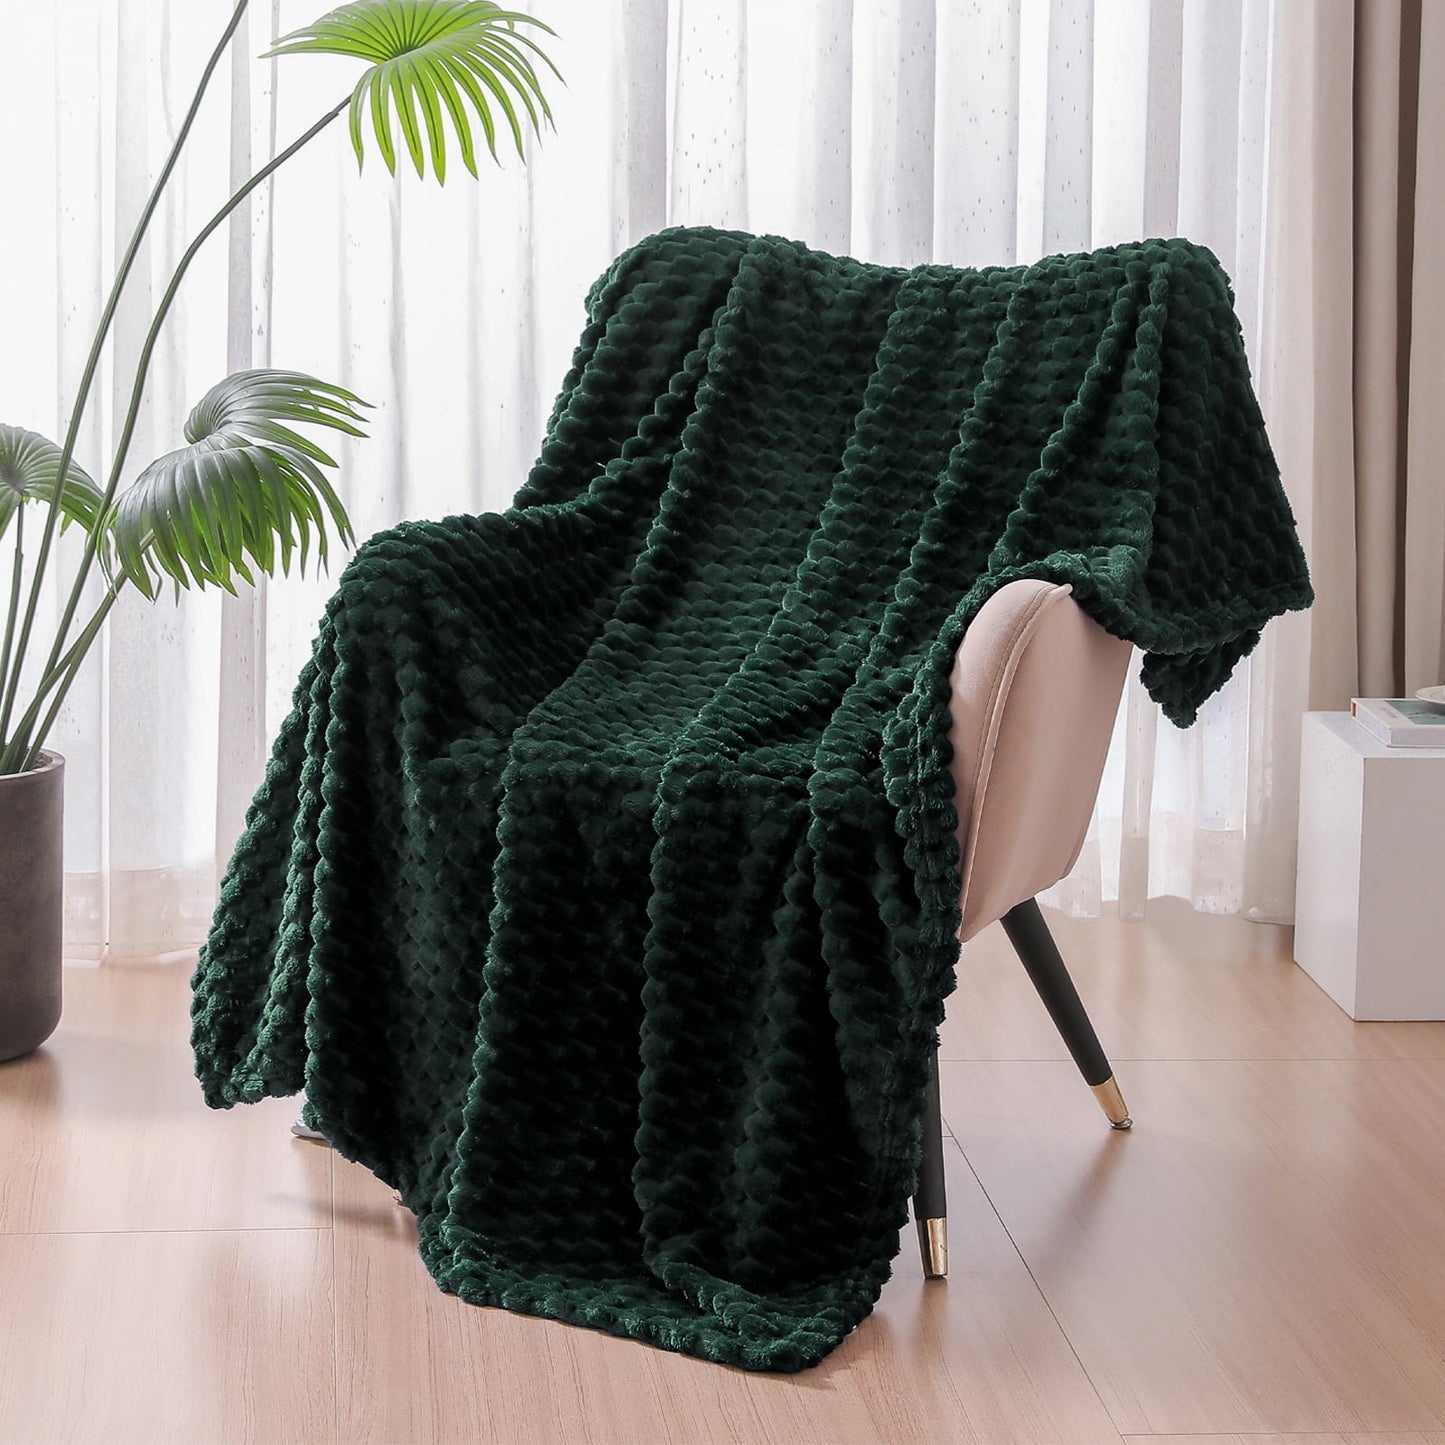 Exclusivo Mezcla Large Soft Fleece Throw Blanket, 50x70 Inches Stylish Jacquard Throw Blanket for Couch, Cozy, Warm, Lightweight and Decorative Forest Green Blanket